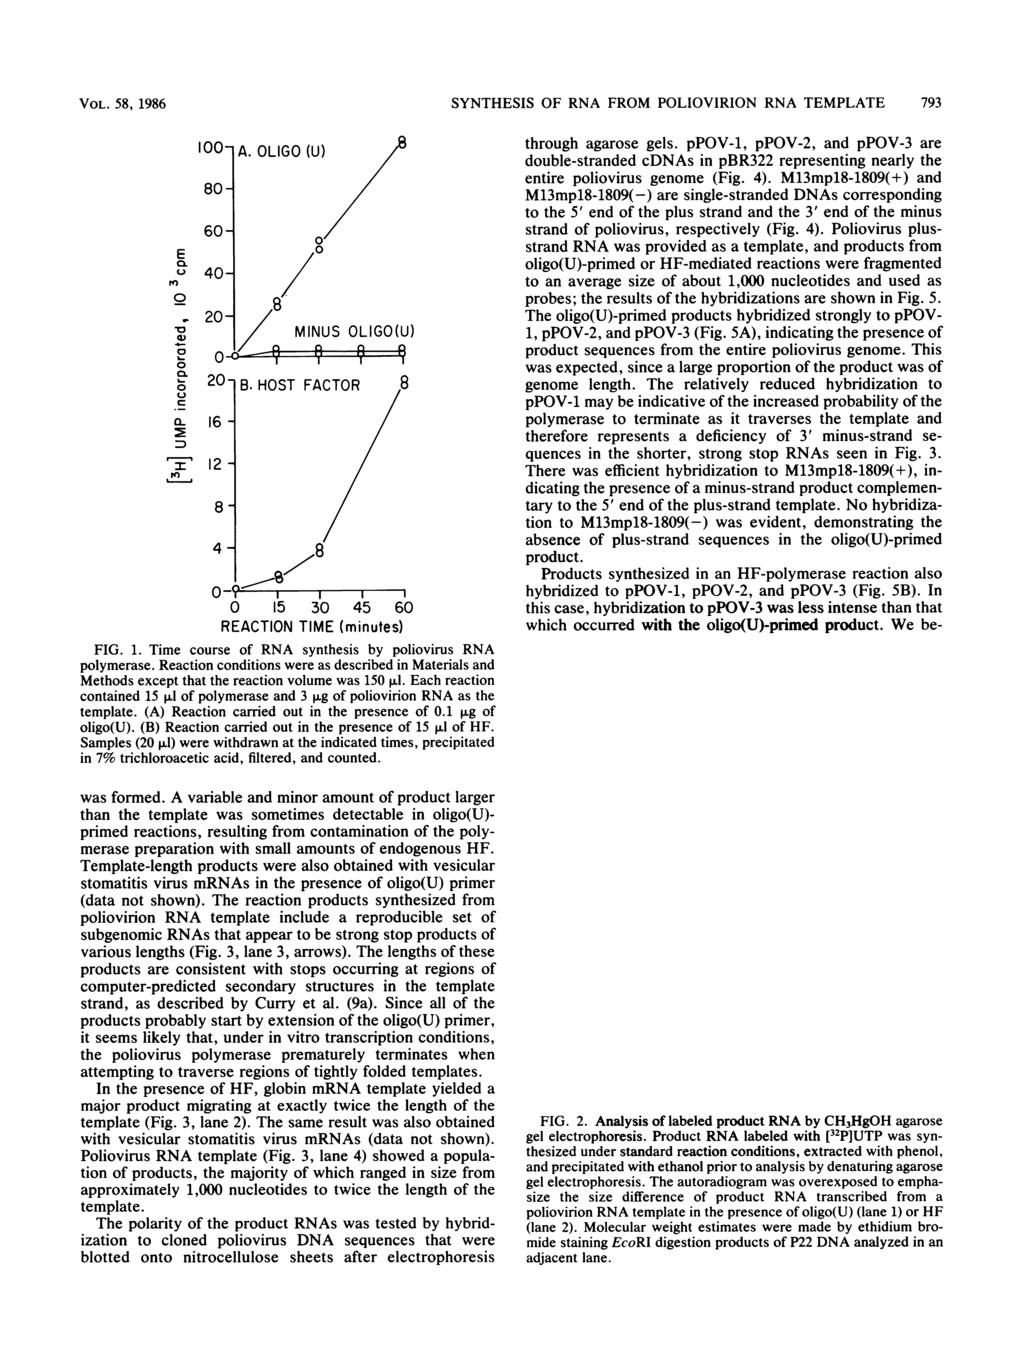 VOL. 58, 1986 SYNTHESIS OF RNA FROM POLIOVIRION RNA TEMPLATE 793 E CL r CL ~ a 15 3 45 6 REACTION TIME (minutes) FIG. 1. Time course of RNA synthesis by poliovirus RNA polymerase.